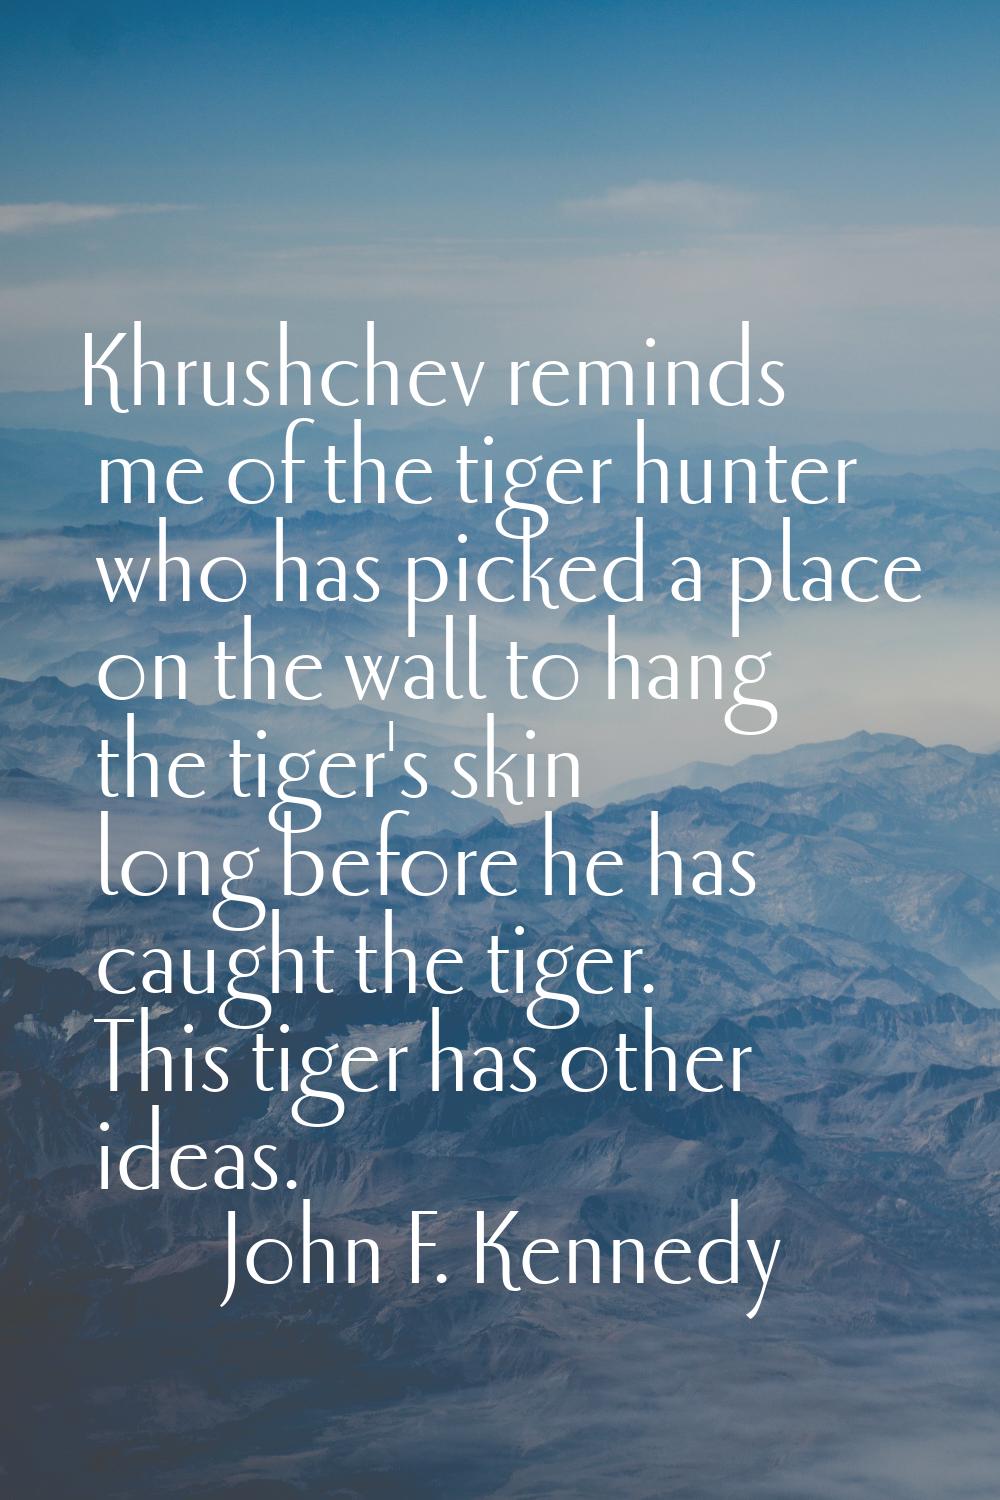 Khrushchev reminds me of the tiger hunter who has picked a place on the wall to hang the tiger's sk